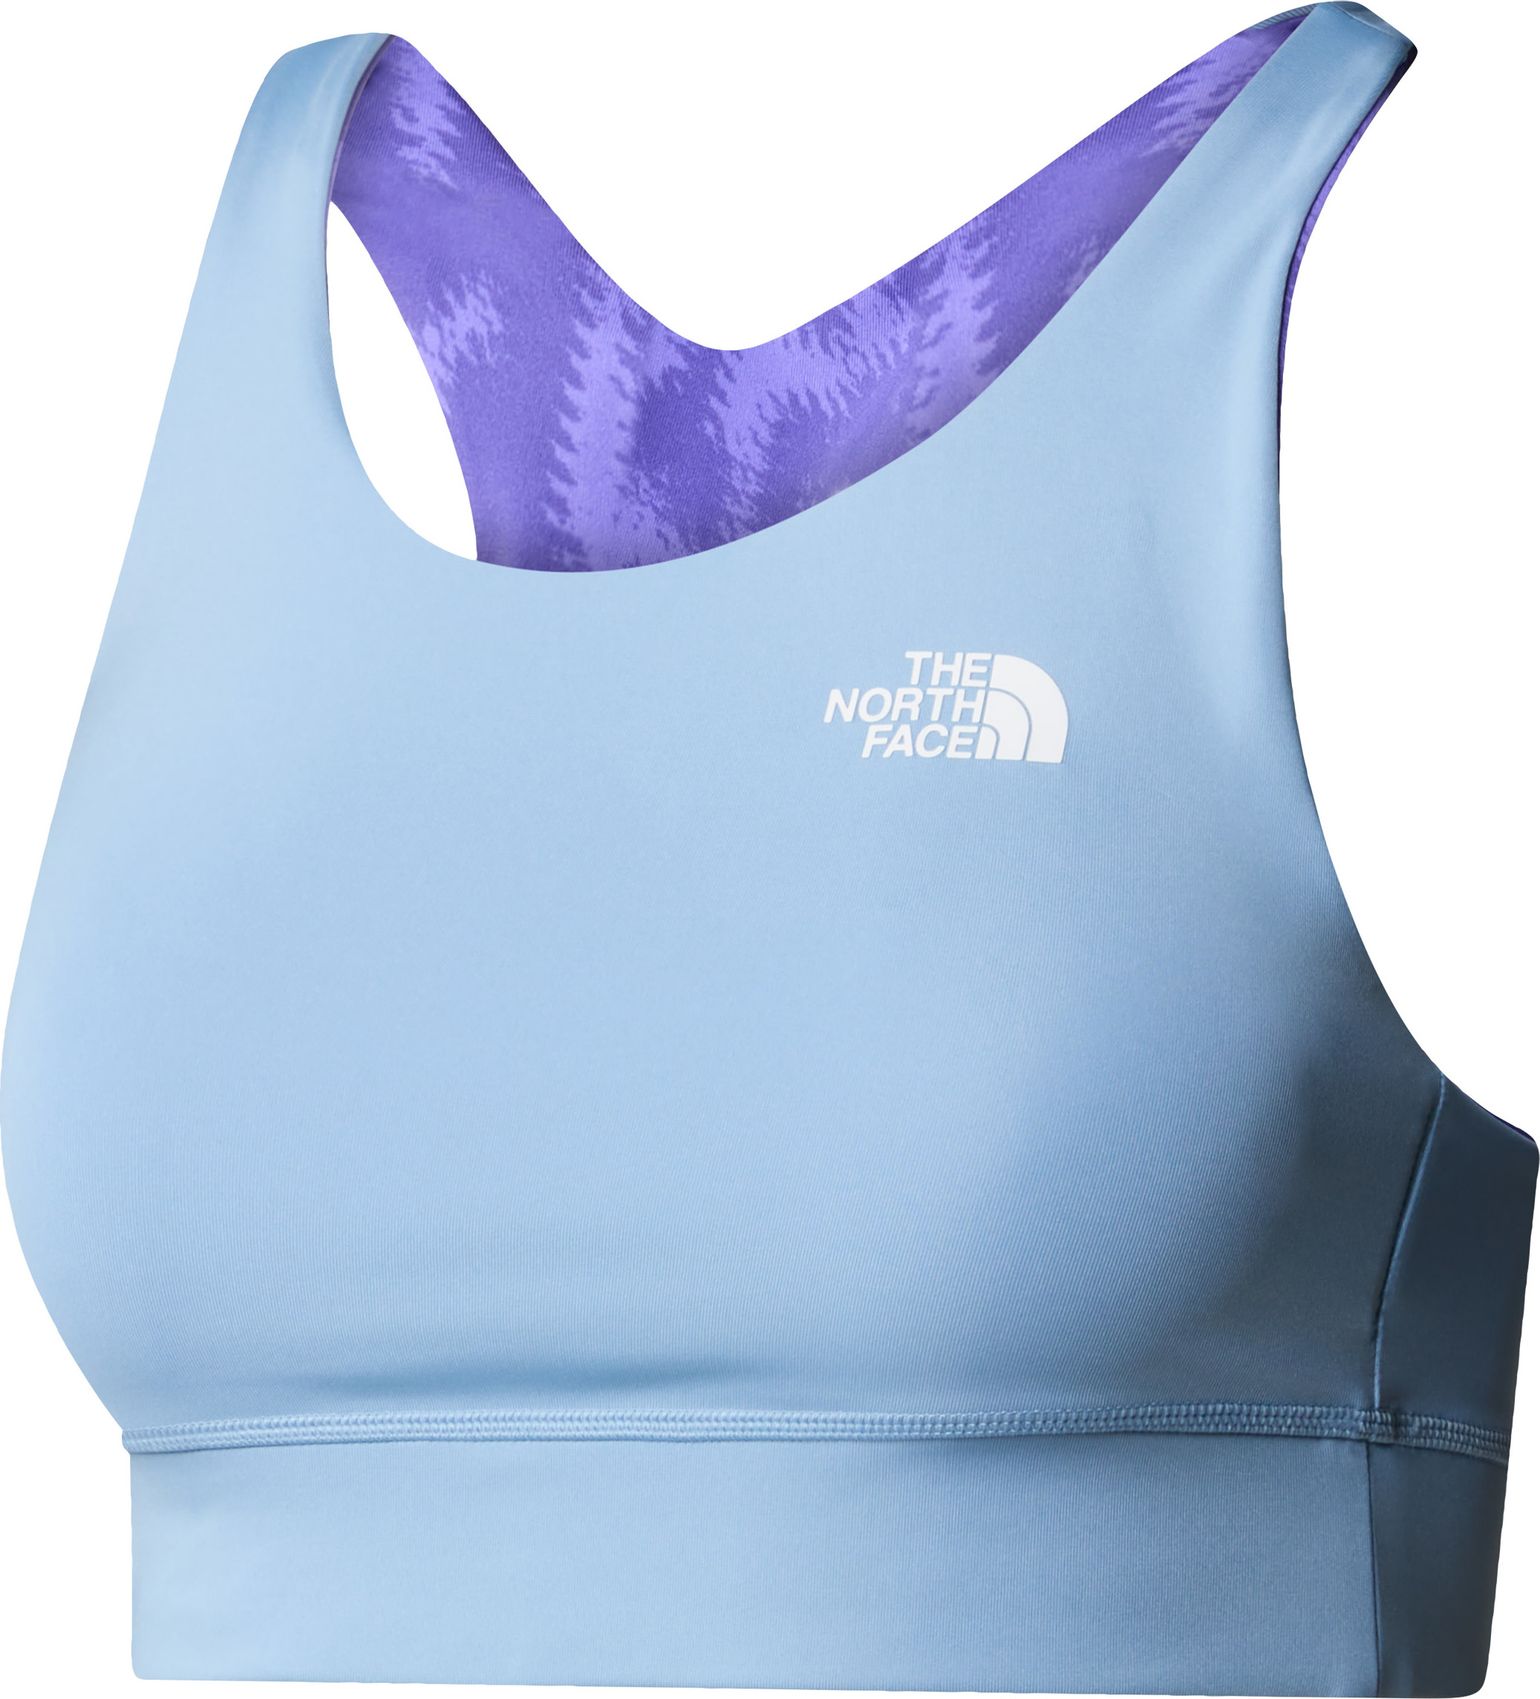 The North Face Women's Flex Printed Bra Optic Violet Abstract Pitcher Plant Print